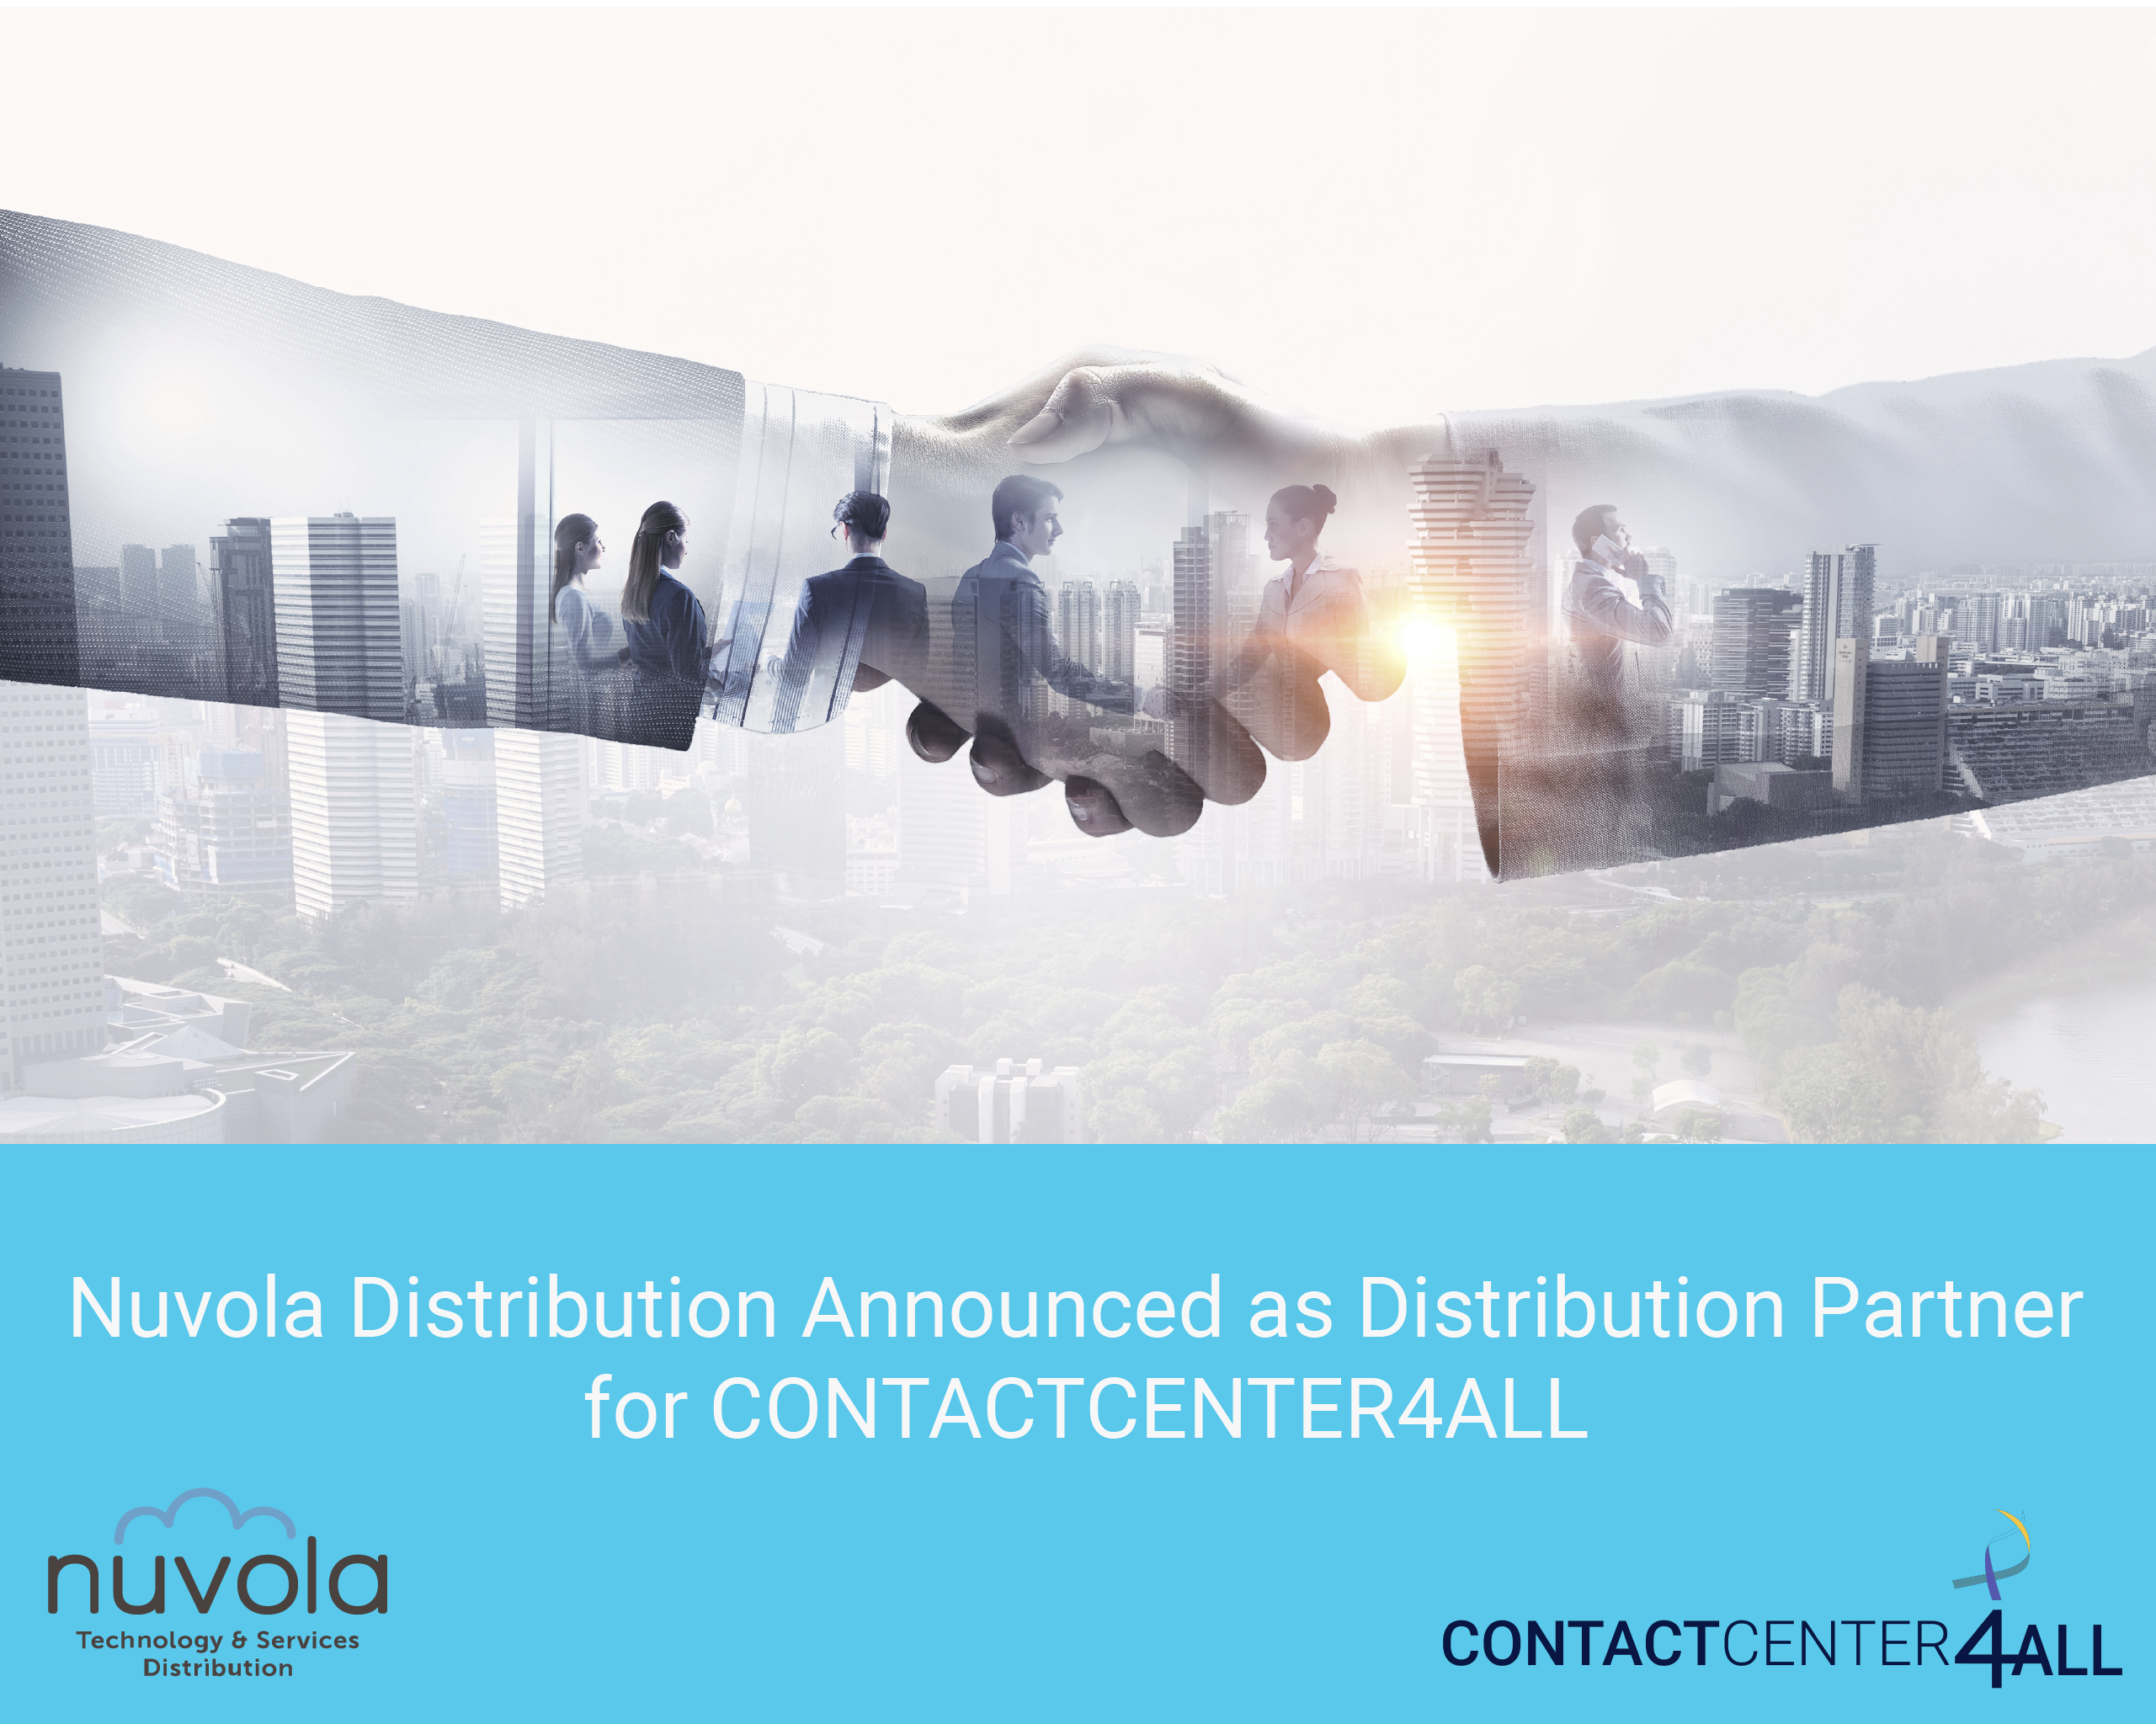 Nuvola announced Distribution Partner for Contactcenter4all